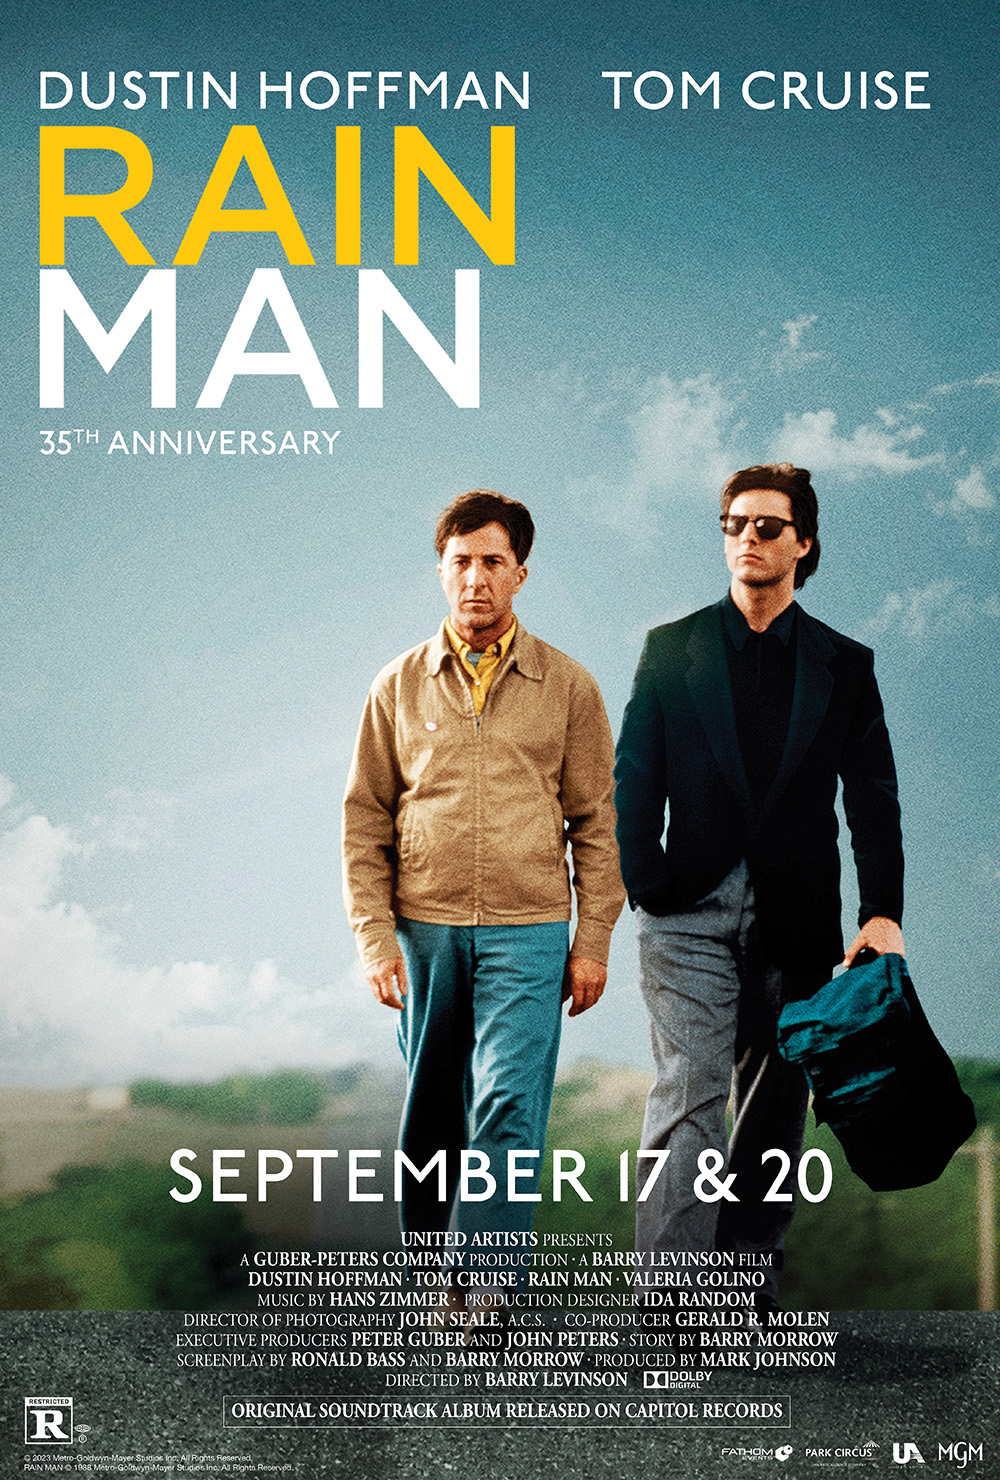 movie poster for the Fathom Events 35th anniversary theatrical re-release of the 1988 film "Rain Man." It features stars Dustin Hoffman (on the left) and Tom Cruise, walking beside each other below the words "Rain Man 35th Anniversary." In white lettering just below them are the air dates: September 17 & 20.